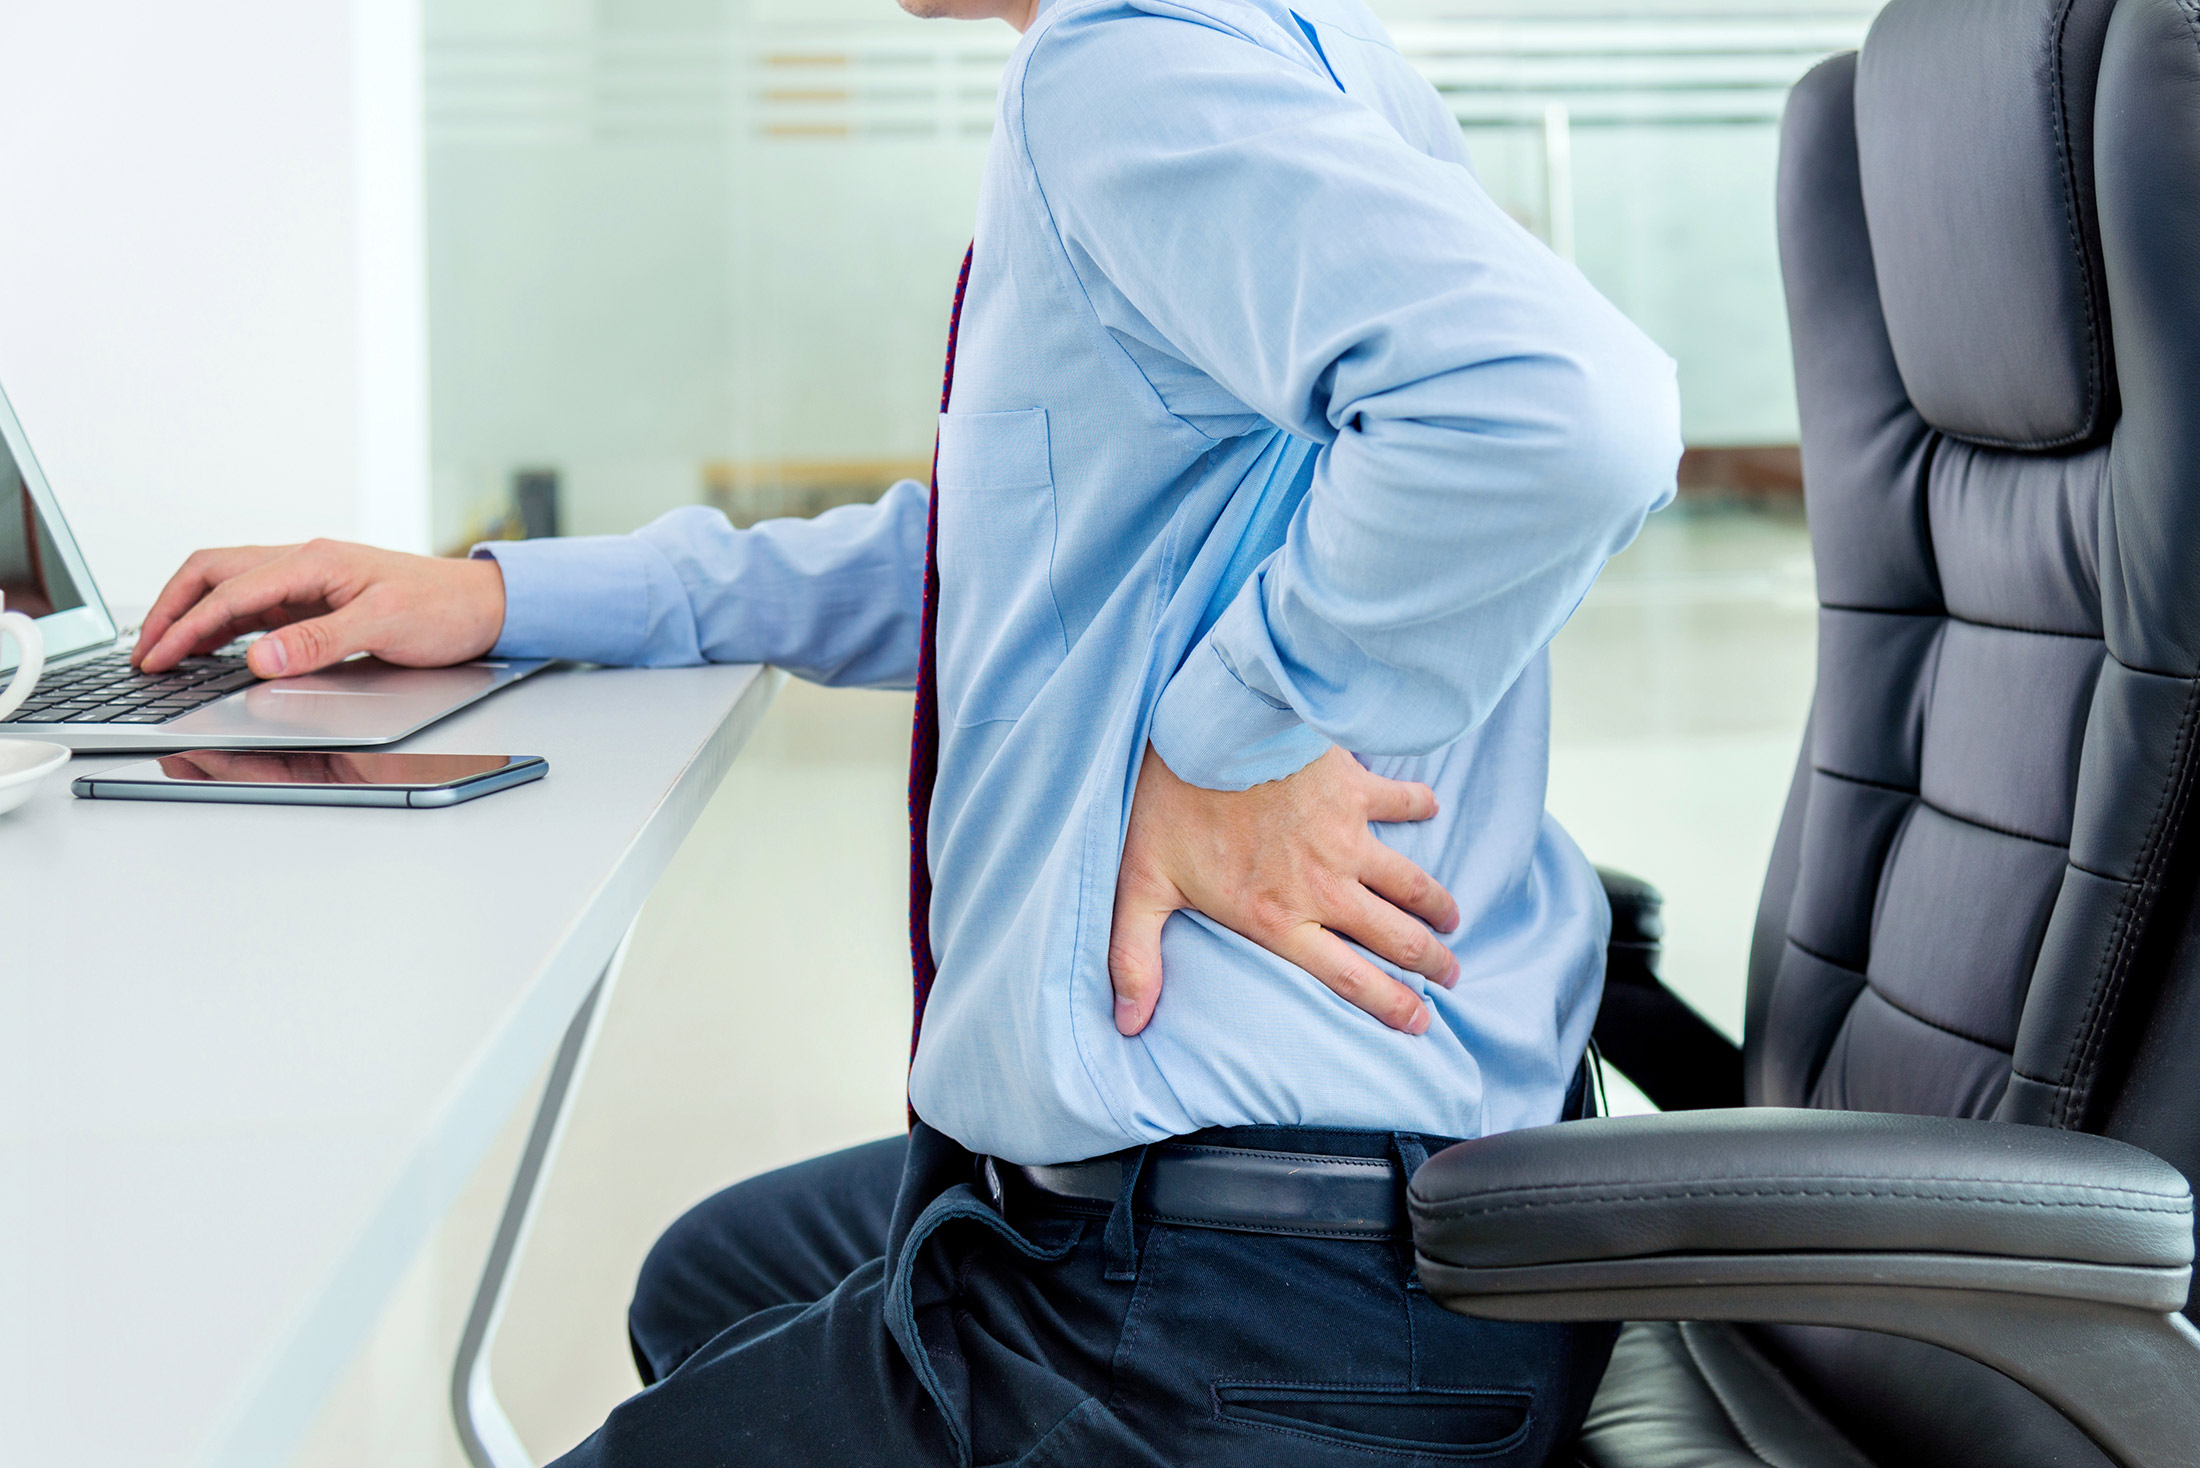 back and neck pain while working from home and how to prevent